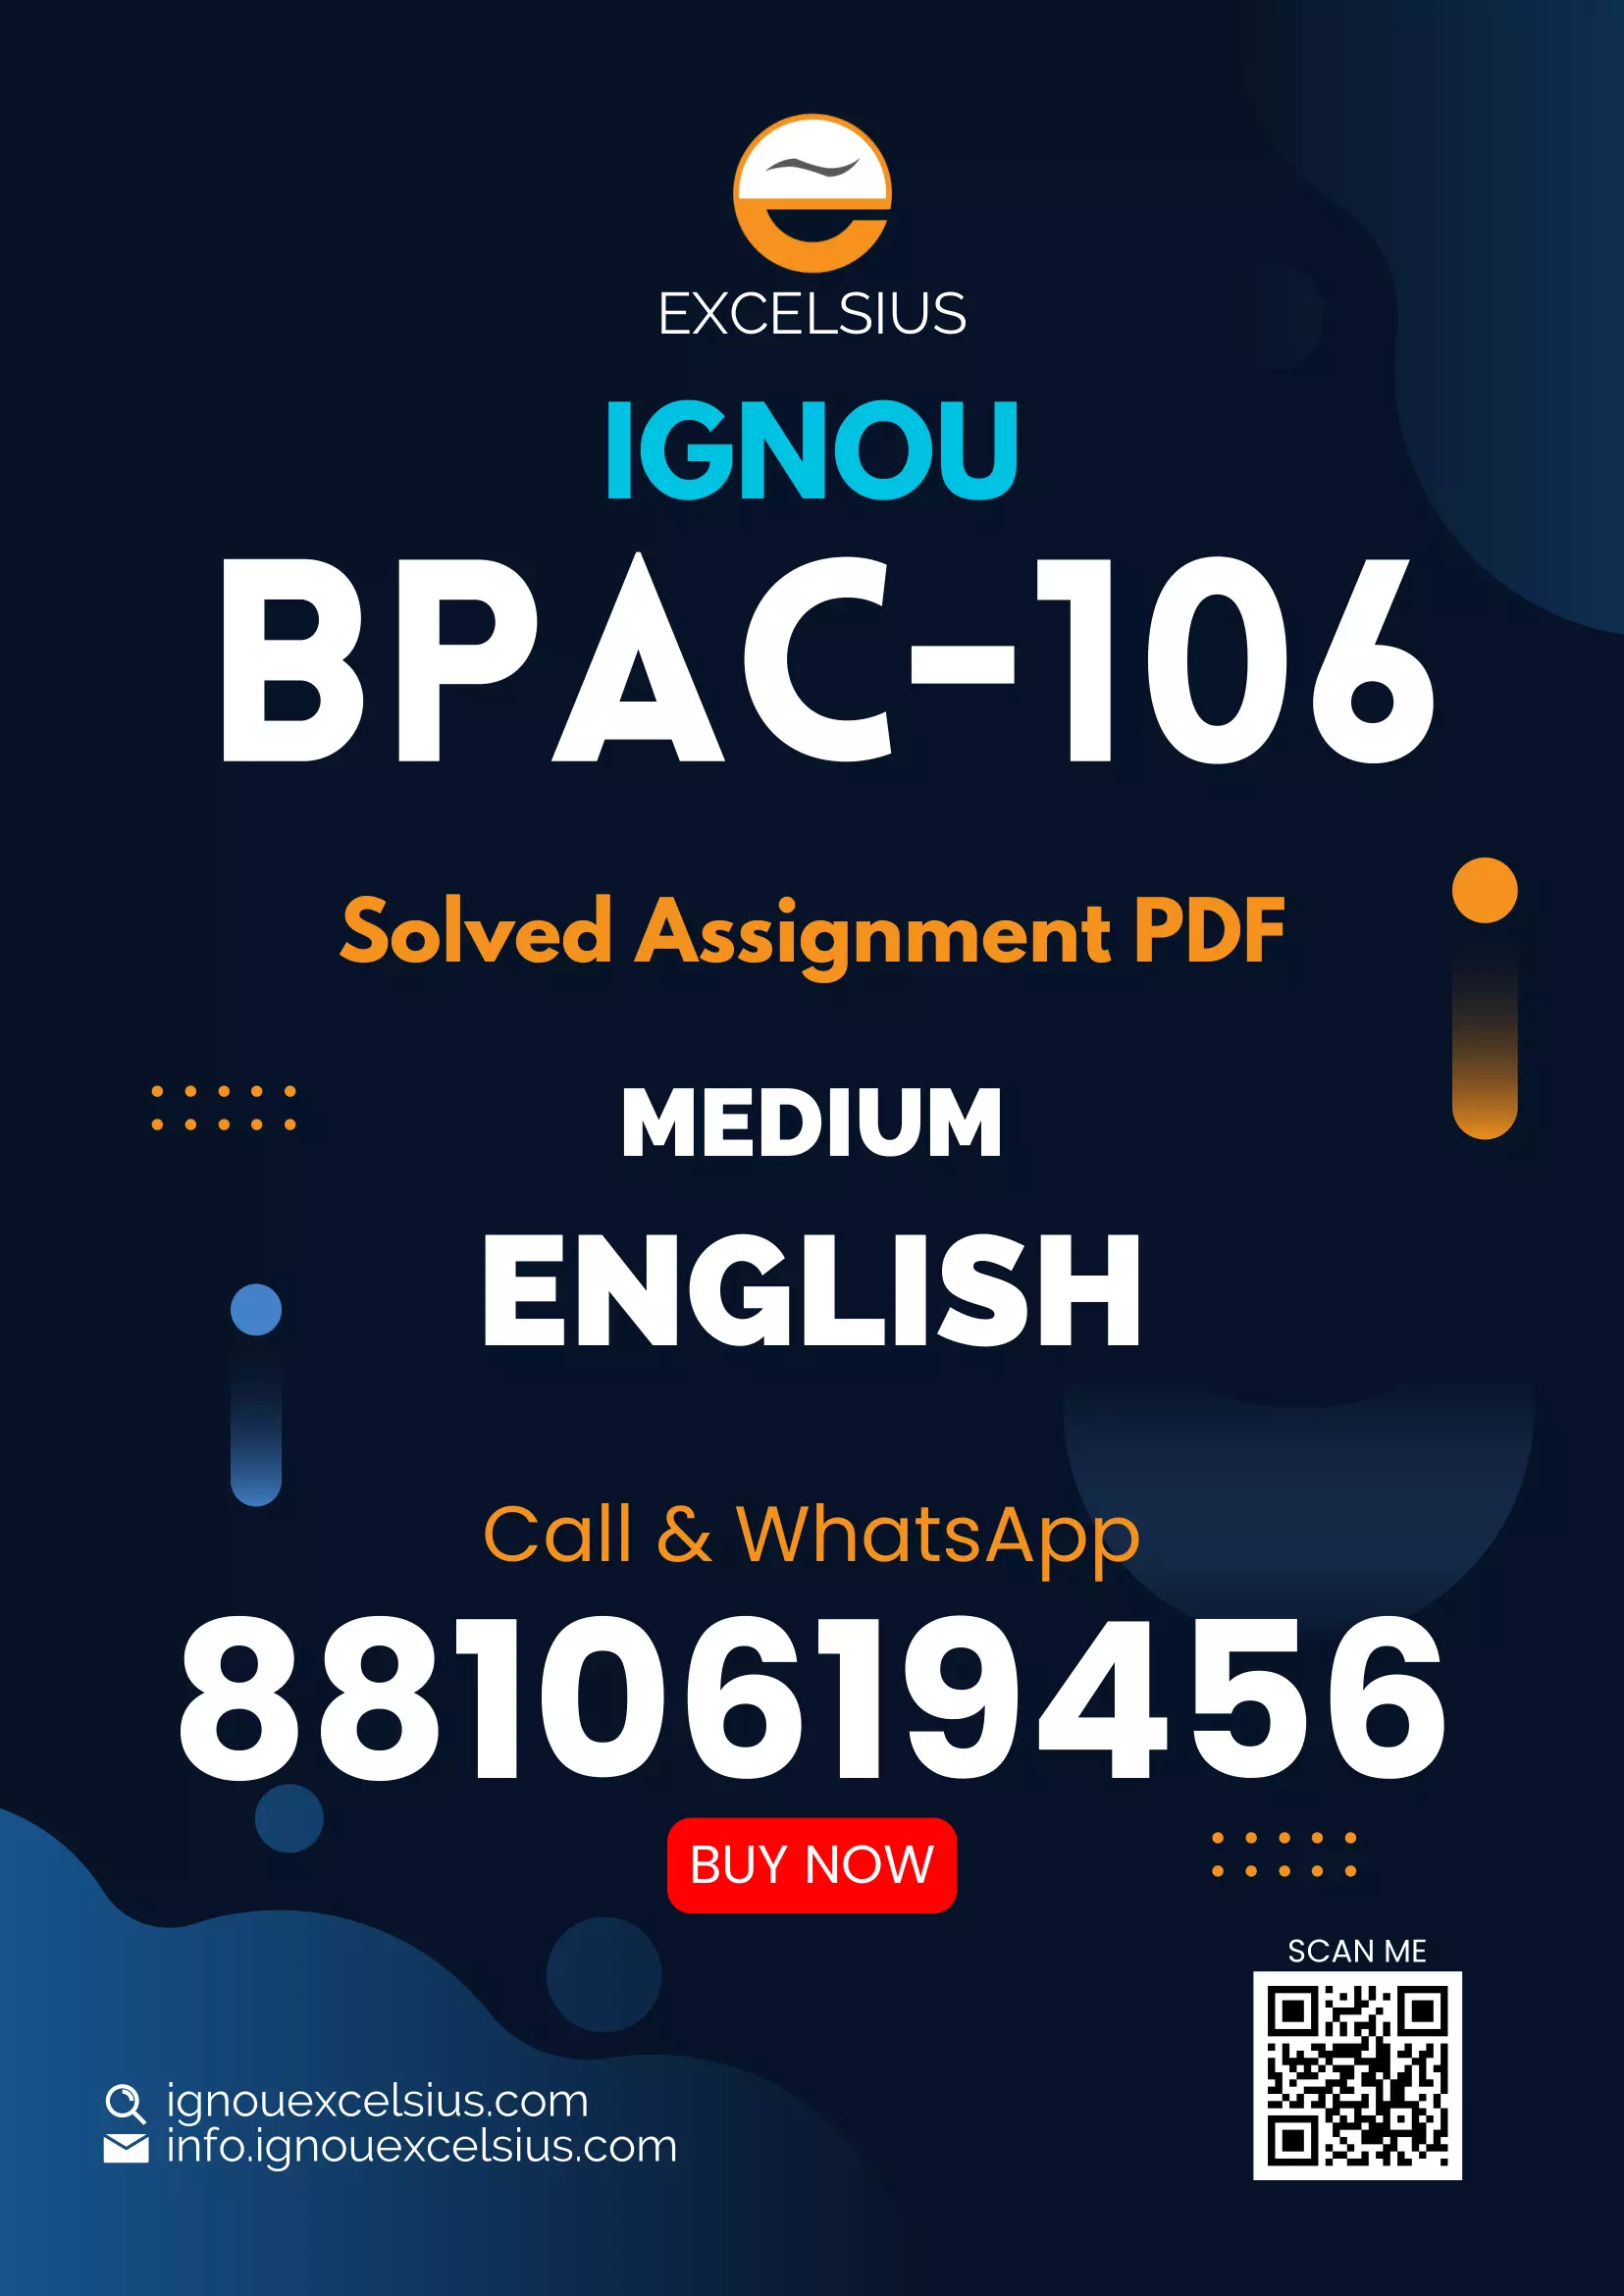 IGNOU BPAC-106 - Understanding Public Policy, Latest Solved Assignment-July 2022 – January 2023